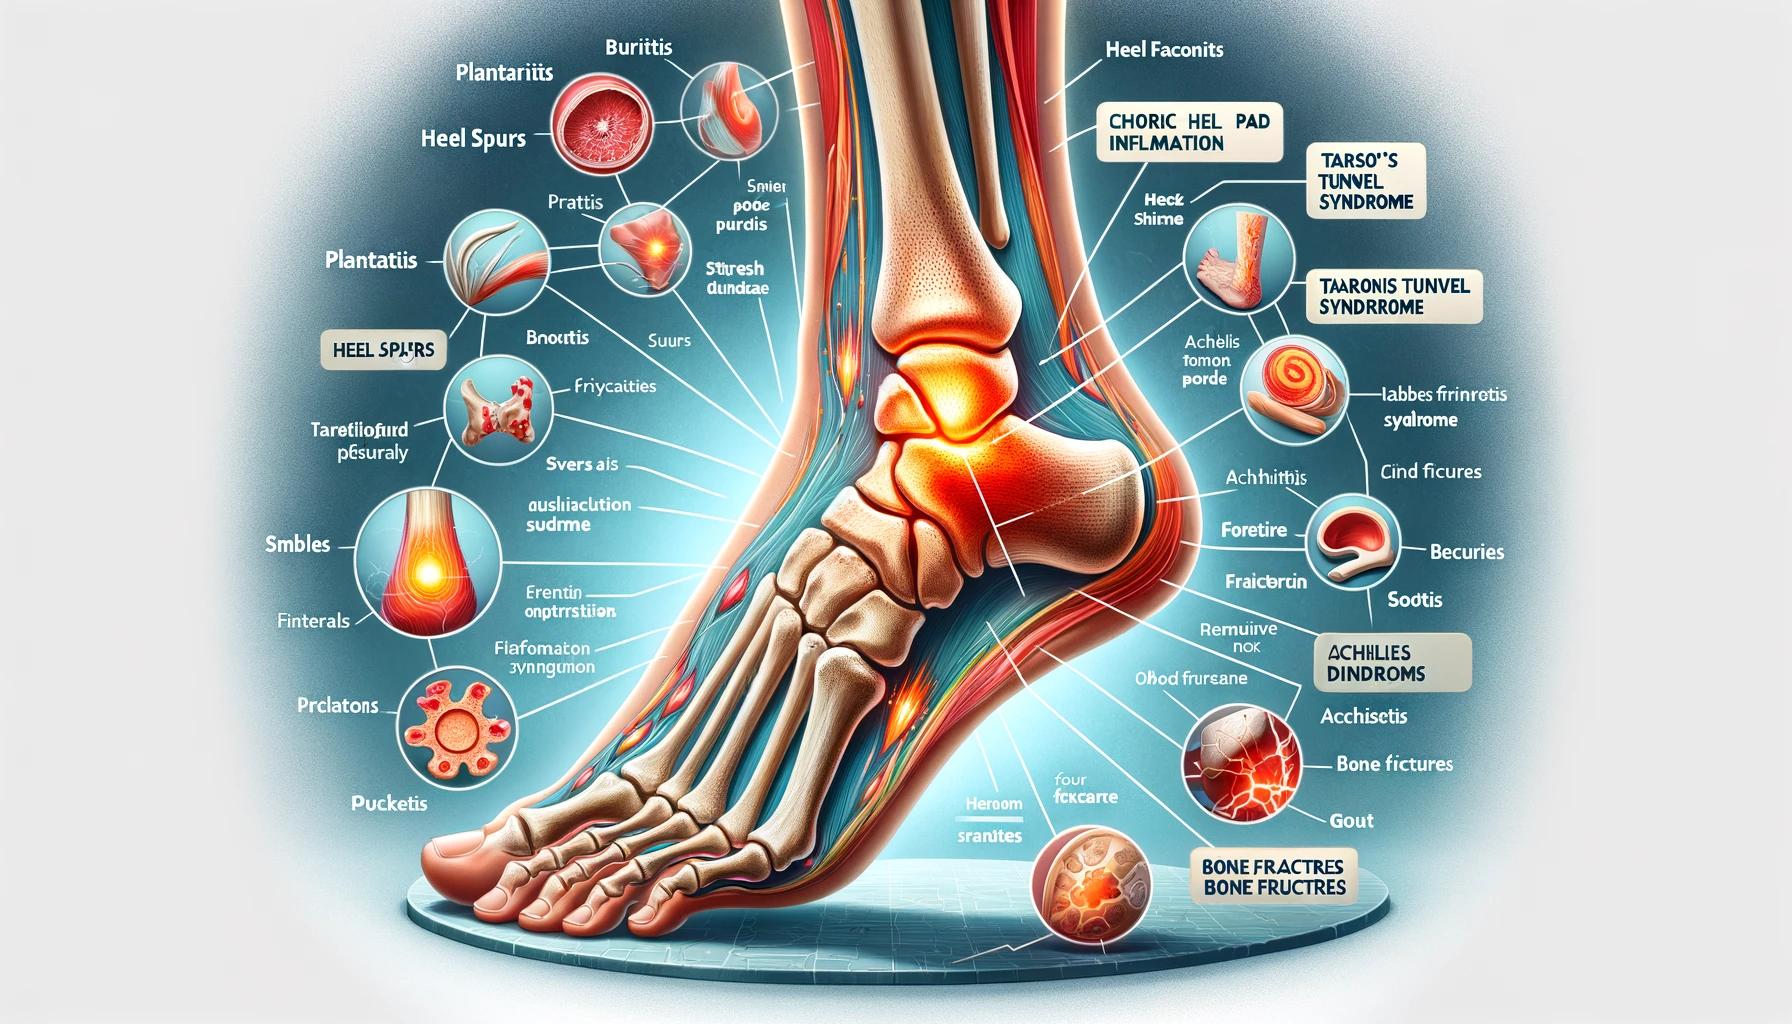 Heel and Foot Pain Causes, Symptoms, and Treatments